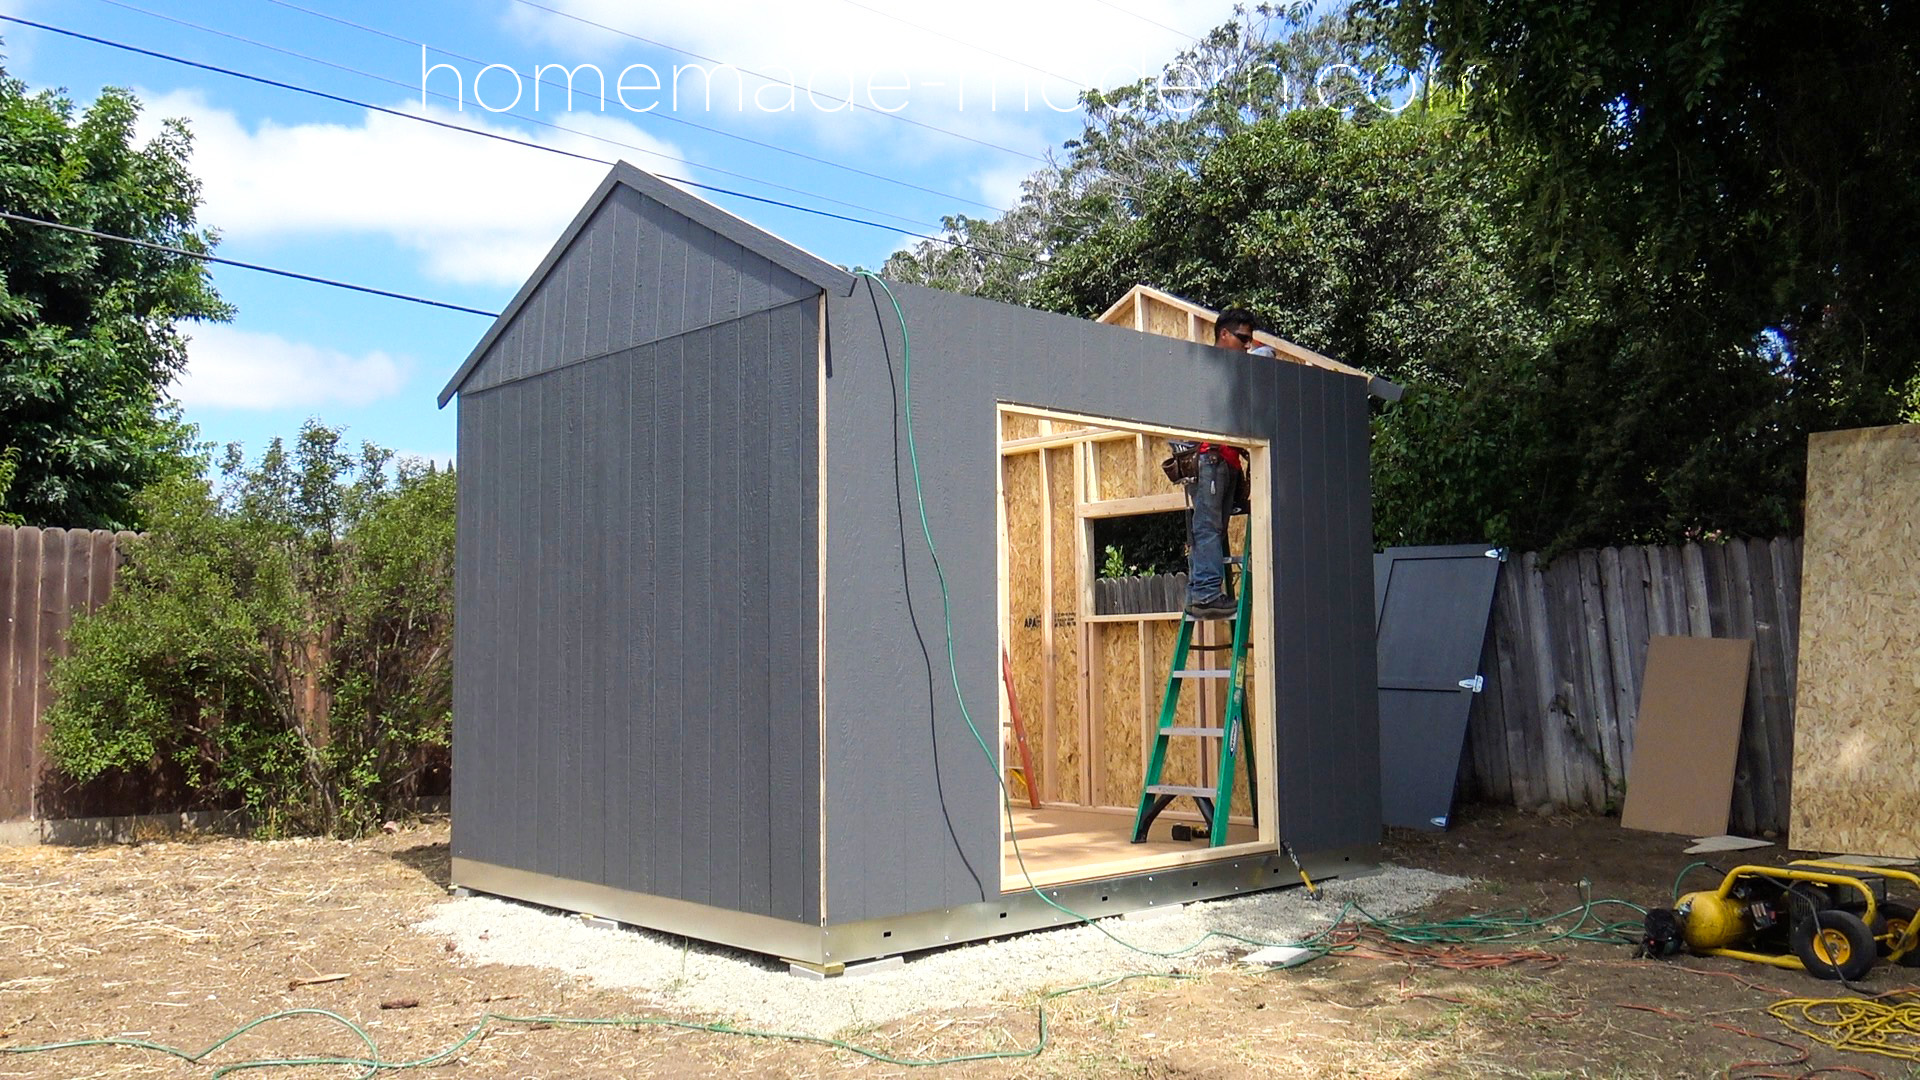 This off-the-grid solar powered workshop was made by retrofitting a prefabricated shed from TuffShed with a 400watt solar kit also from Home Depot. For more information go to HomeMade-Modern.com